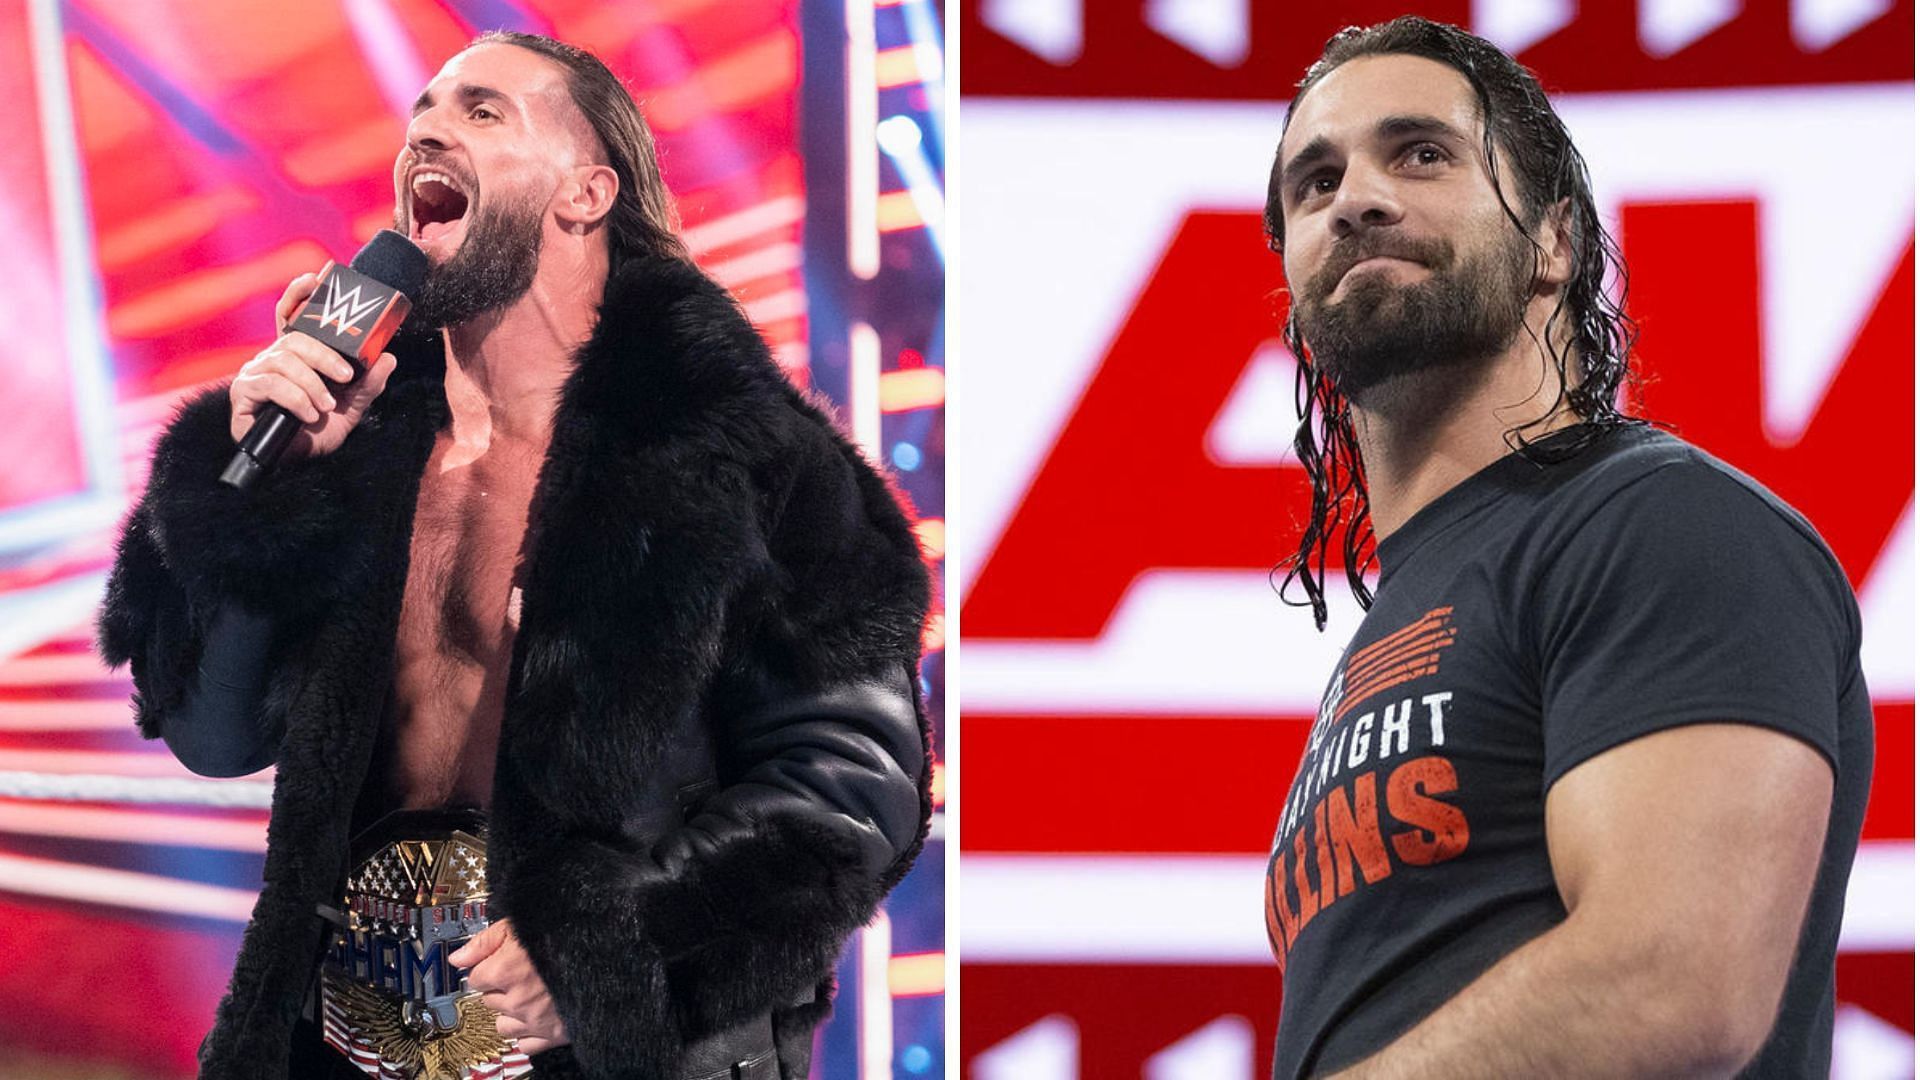 Seth Rollins is a former United States Champion